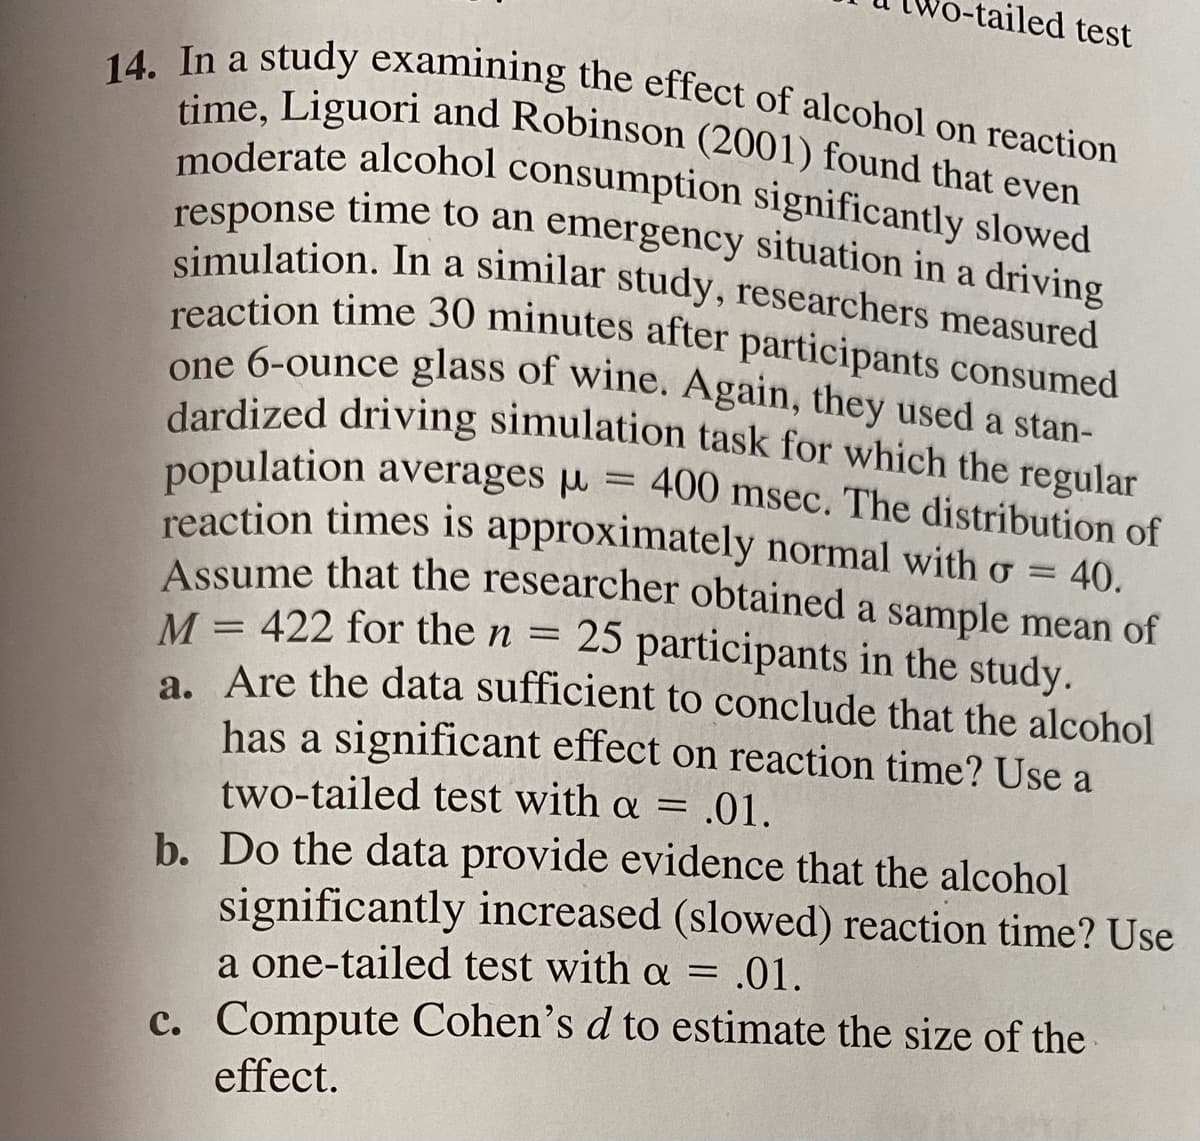 tailed test
14. In a study examining the effect of alcohol on reaction
reaction time 30 minutes after participants consumed
simulation. In a similar study, researchers measured
moderate alcohol consumption significantly slowed
one 6-ounce glass of wine. Again, they used a stan-
response time to an emergency situation in a driving
time, Liguori and Robinson (2001) found that even
moderate alcohol consumption significantly slowed
time to an emergency situation in a driving
response
simulation. In a similar study, researchers measured
reaction time 30 minutes after participants consumed
one 6-ounce glass of wine. Again, they used a stan-
dardized driving simulation task for which the regular
population averages u = 400 msec. The distribution of
reaction times is approximately normal with o = 40.
A ssume that the researcher obtained a sample mean of
M = 422 for the n = 25 participants in the study.
a. Are the data sufficient to conclude that the alcohol
has a significant effect on reaction time? Use a
two-tailed test with a =.01.
b. Do the data provide evidence that the alcohol
significantly increased (slowed) reaction time? Use
a one-tailed test with a = .01.
%3D
c. Compute Cohen's d to estimate the size of the
effect.
